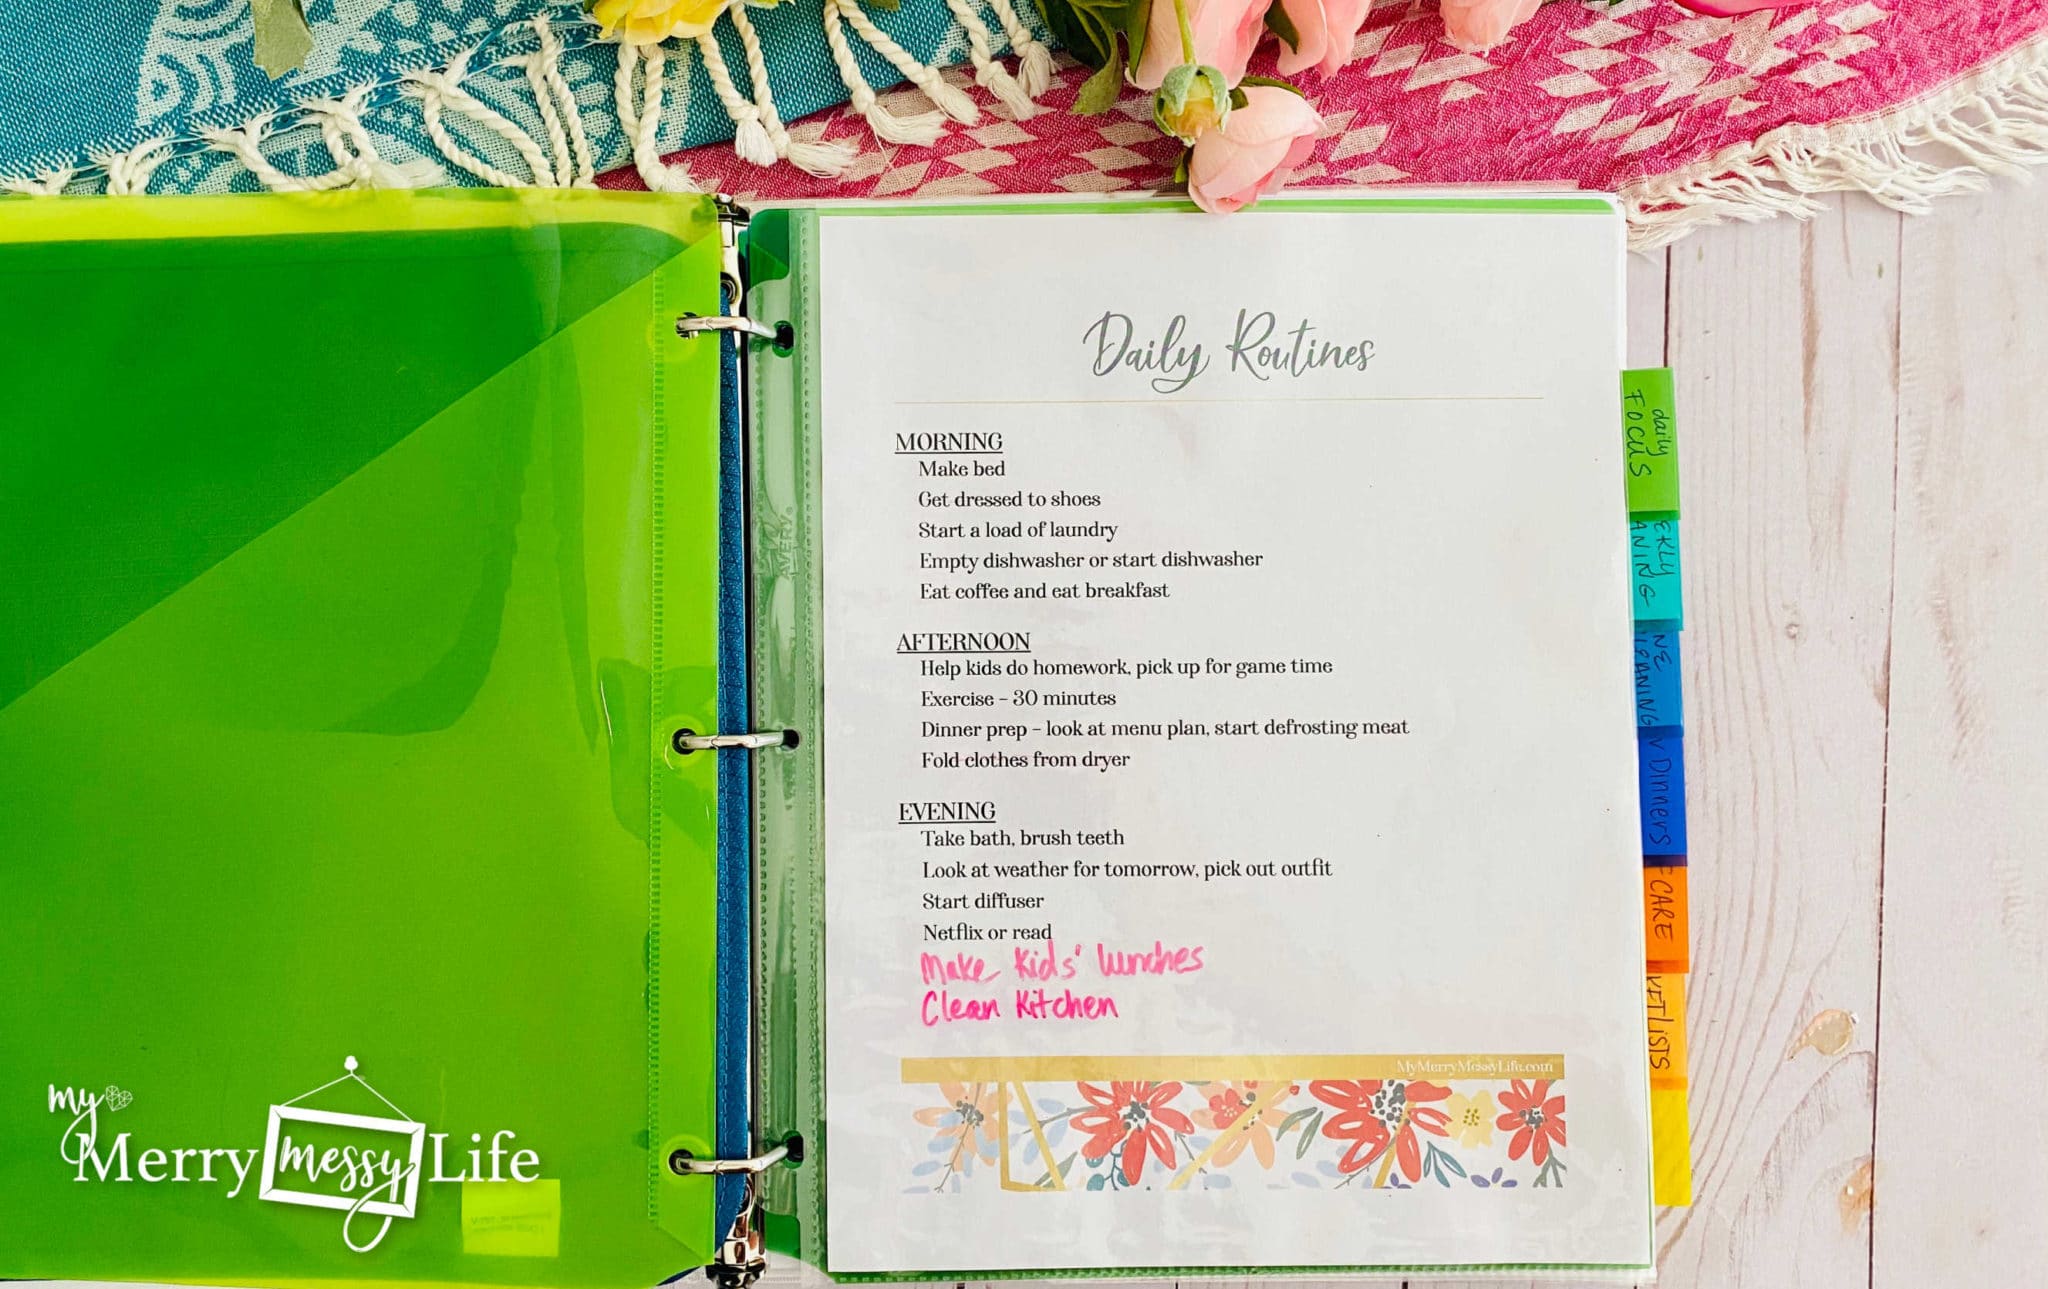 Flylady Daily Routines - how to better organize your life and manage your home